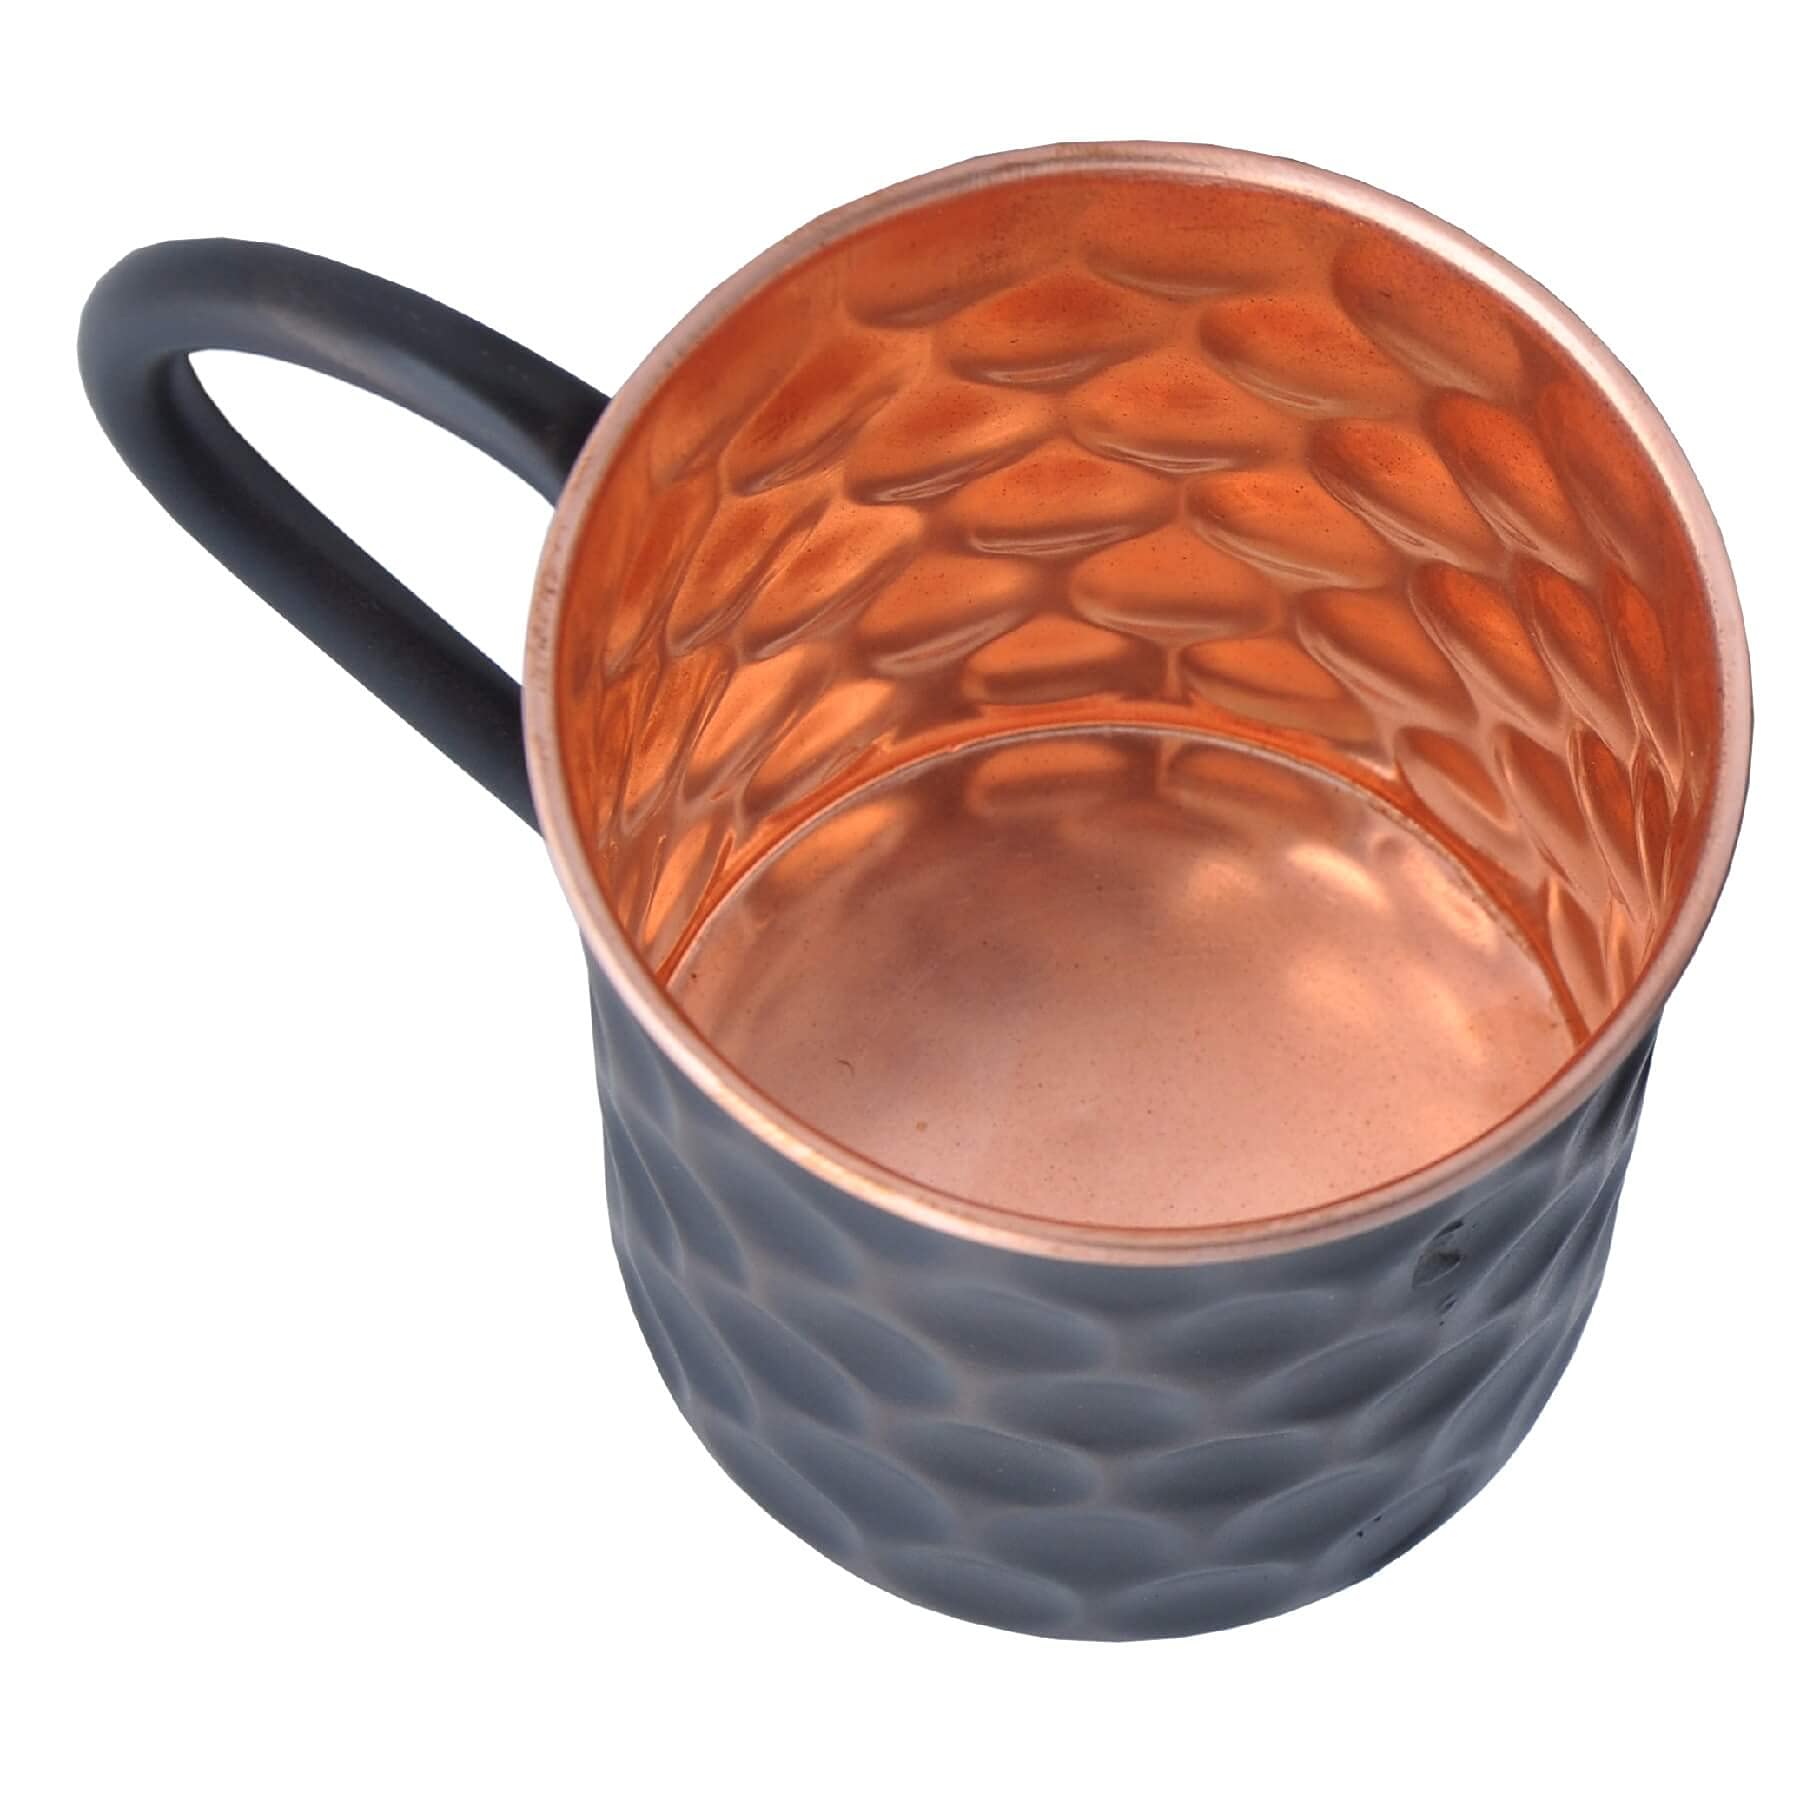 Staglife Black Moscow Mule Copper Mugs - 16 Oz [Set of 2] + 20 Oz [Set of 2]